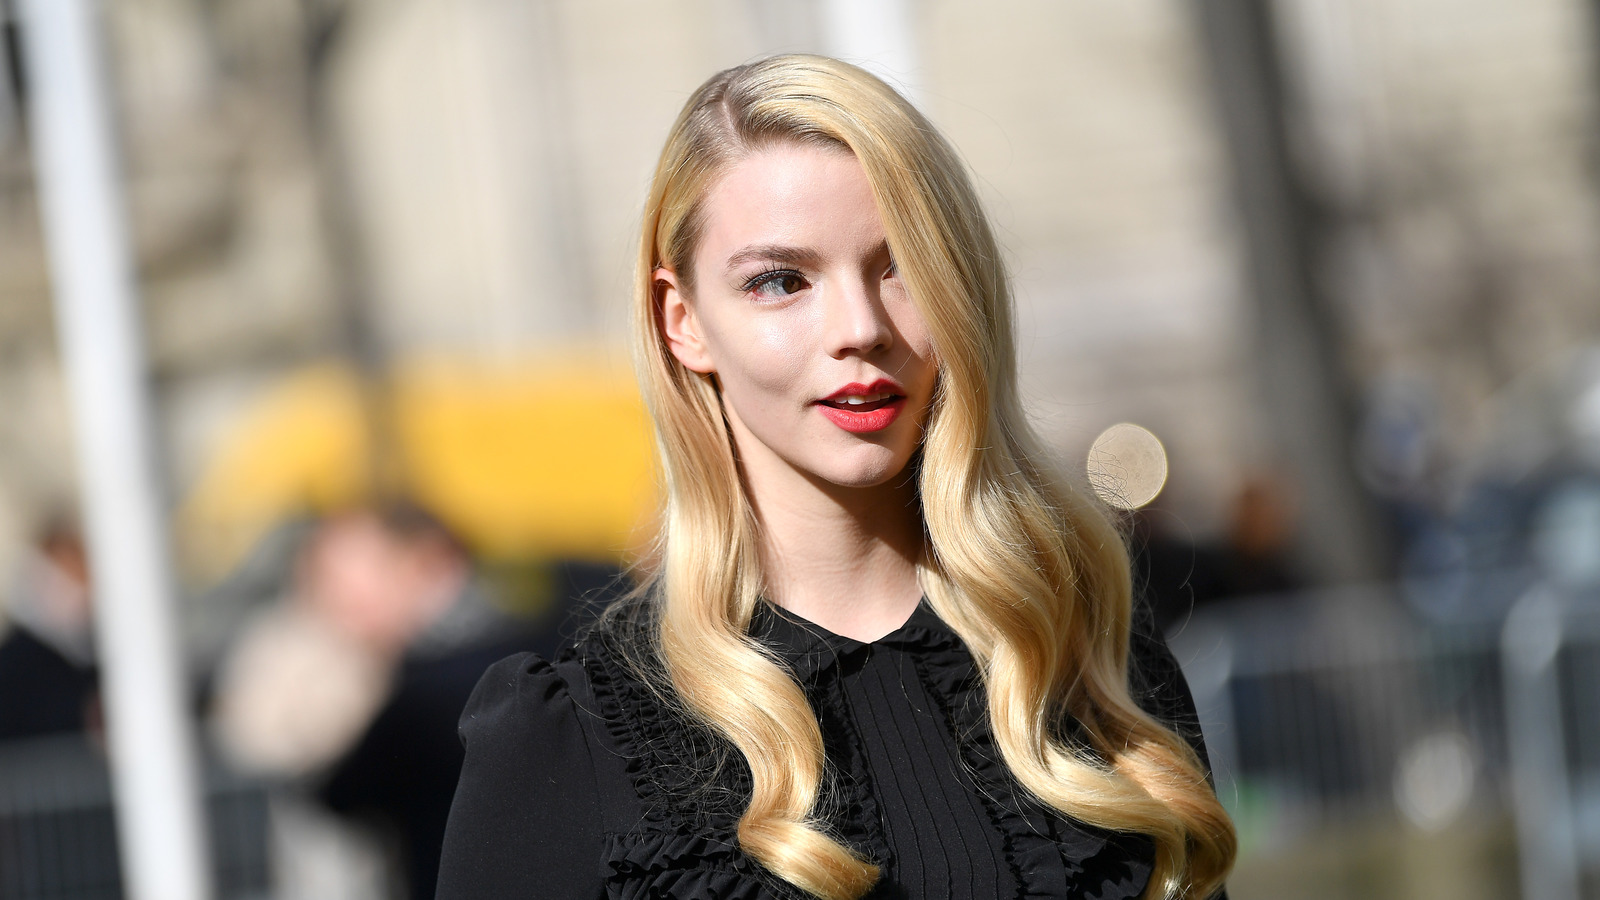 Anya Taylor-Joy Movies & TV Shows List (2023): From The New Mutants to The  Queen's Gambit